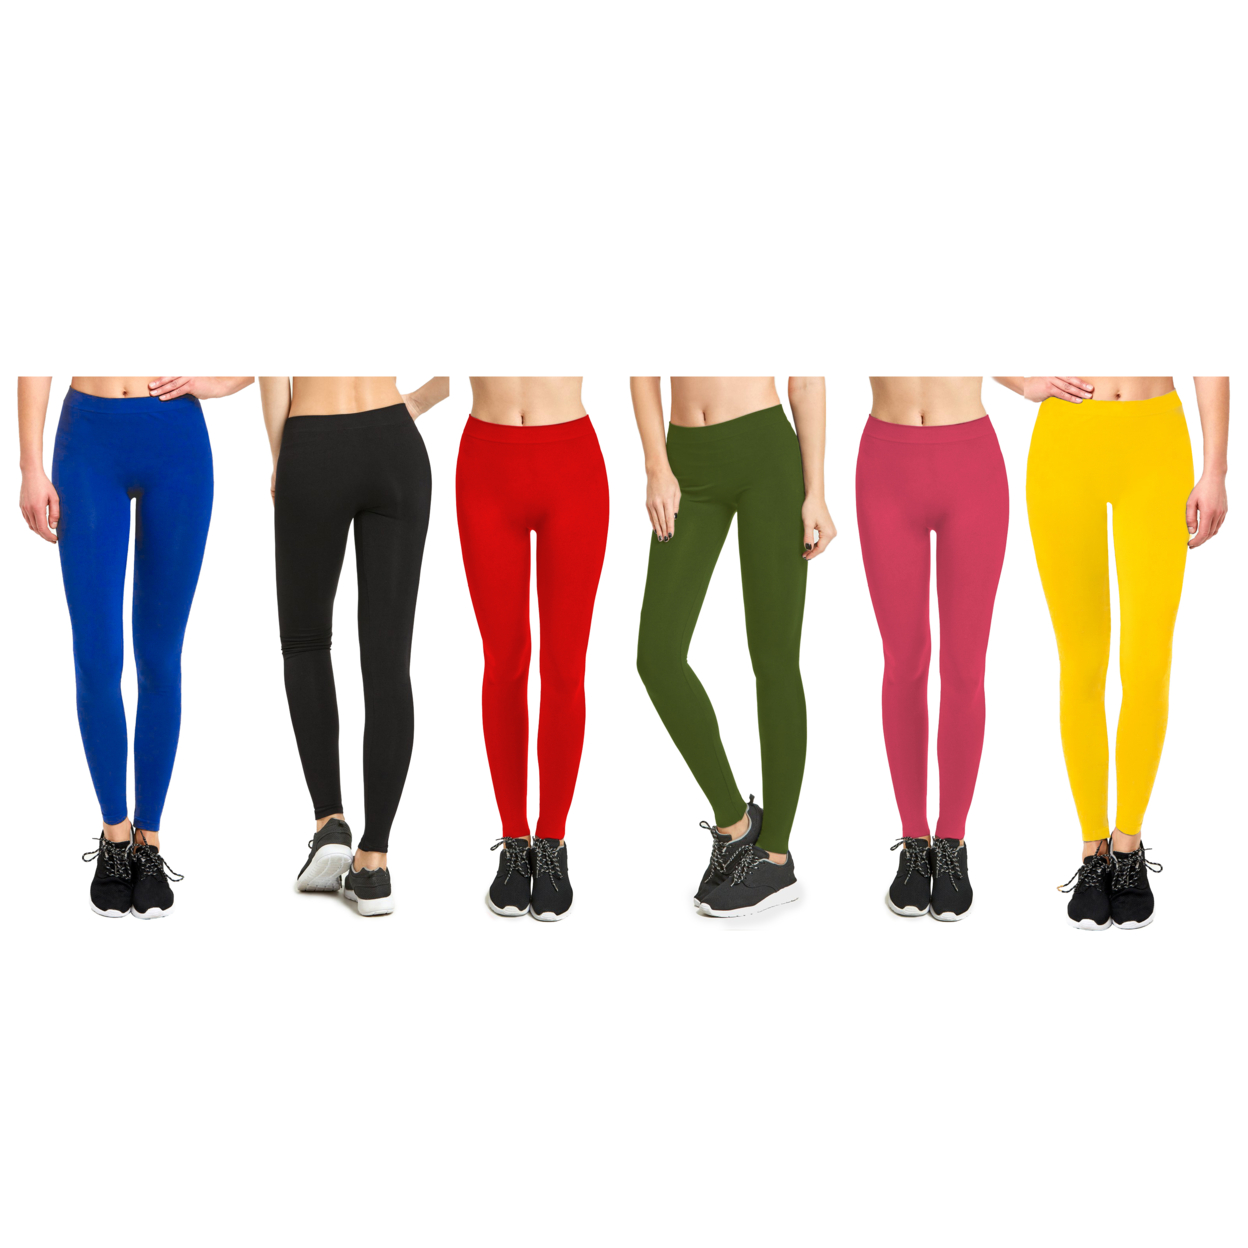 4-Pack: Women's Slim Fit Comfy Stretchy Elastic Waistband Leggings - Large, Animal